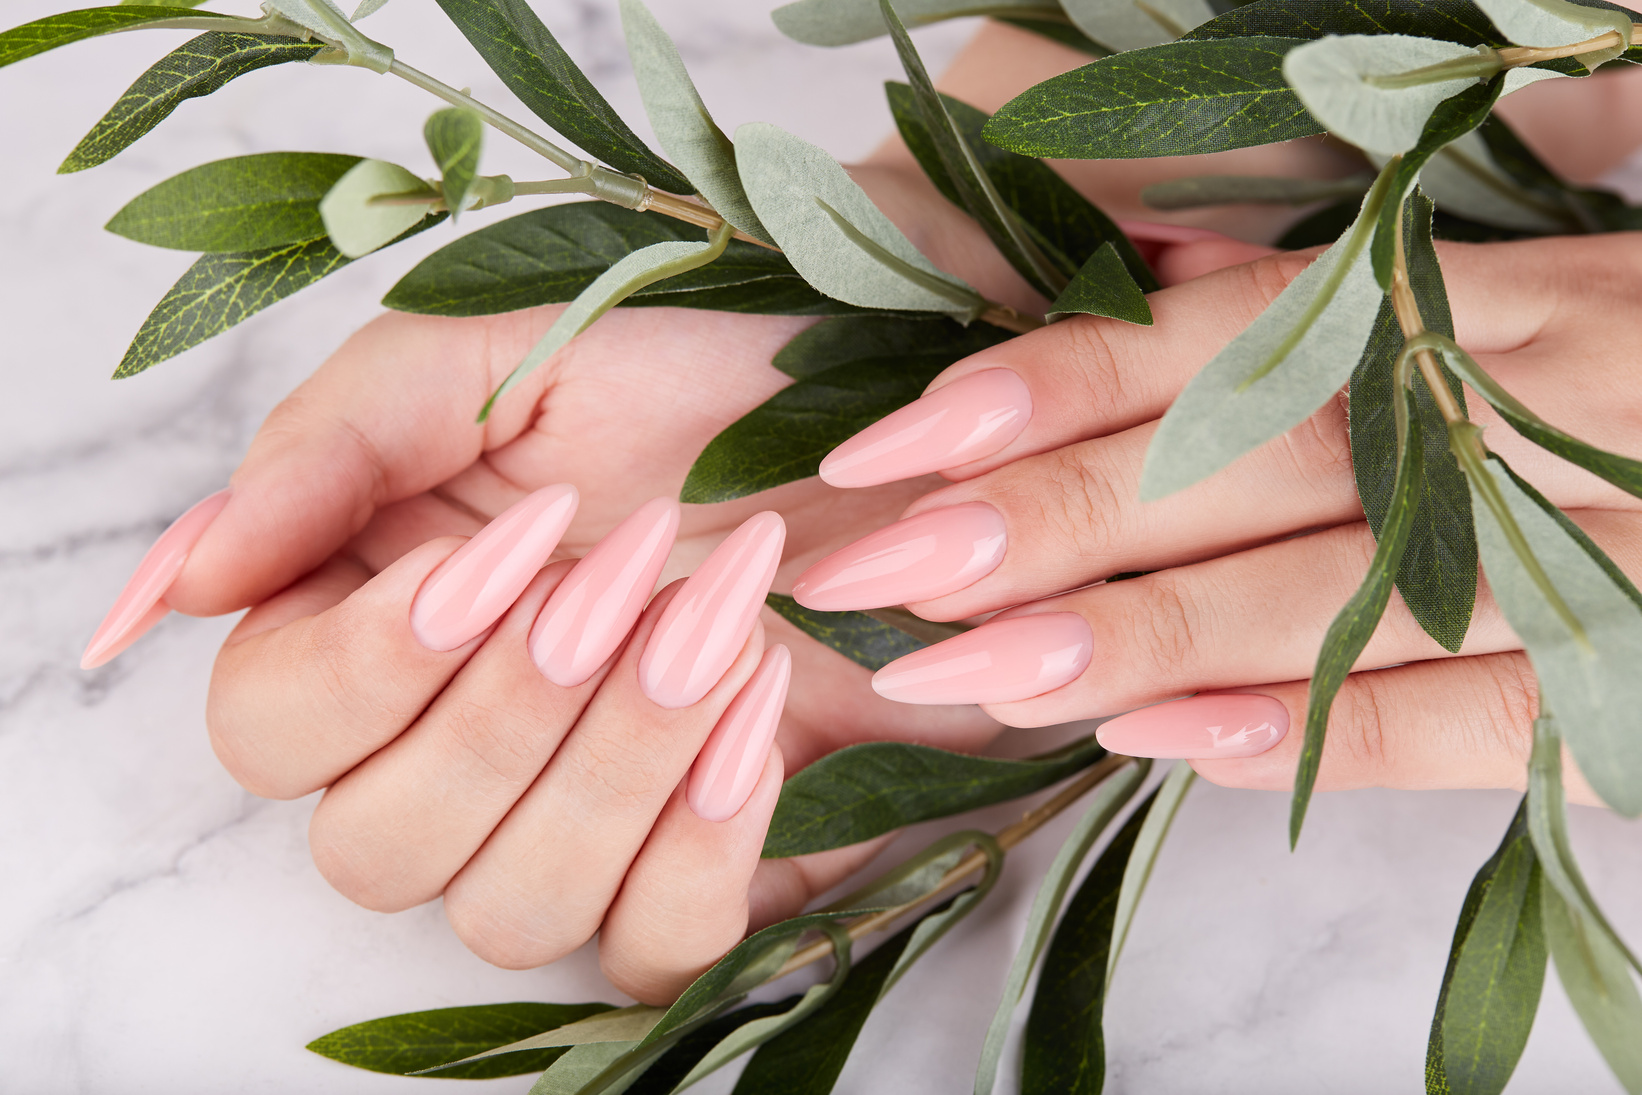 Hands with long artificial manicured nails colored with pink nail polish